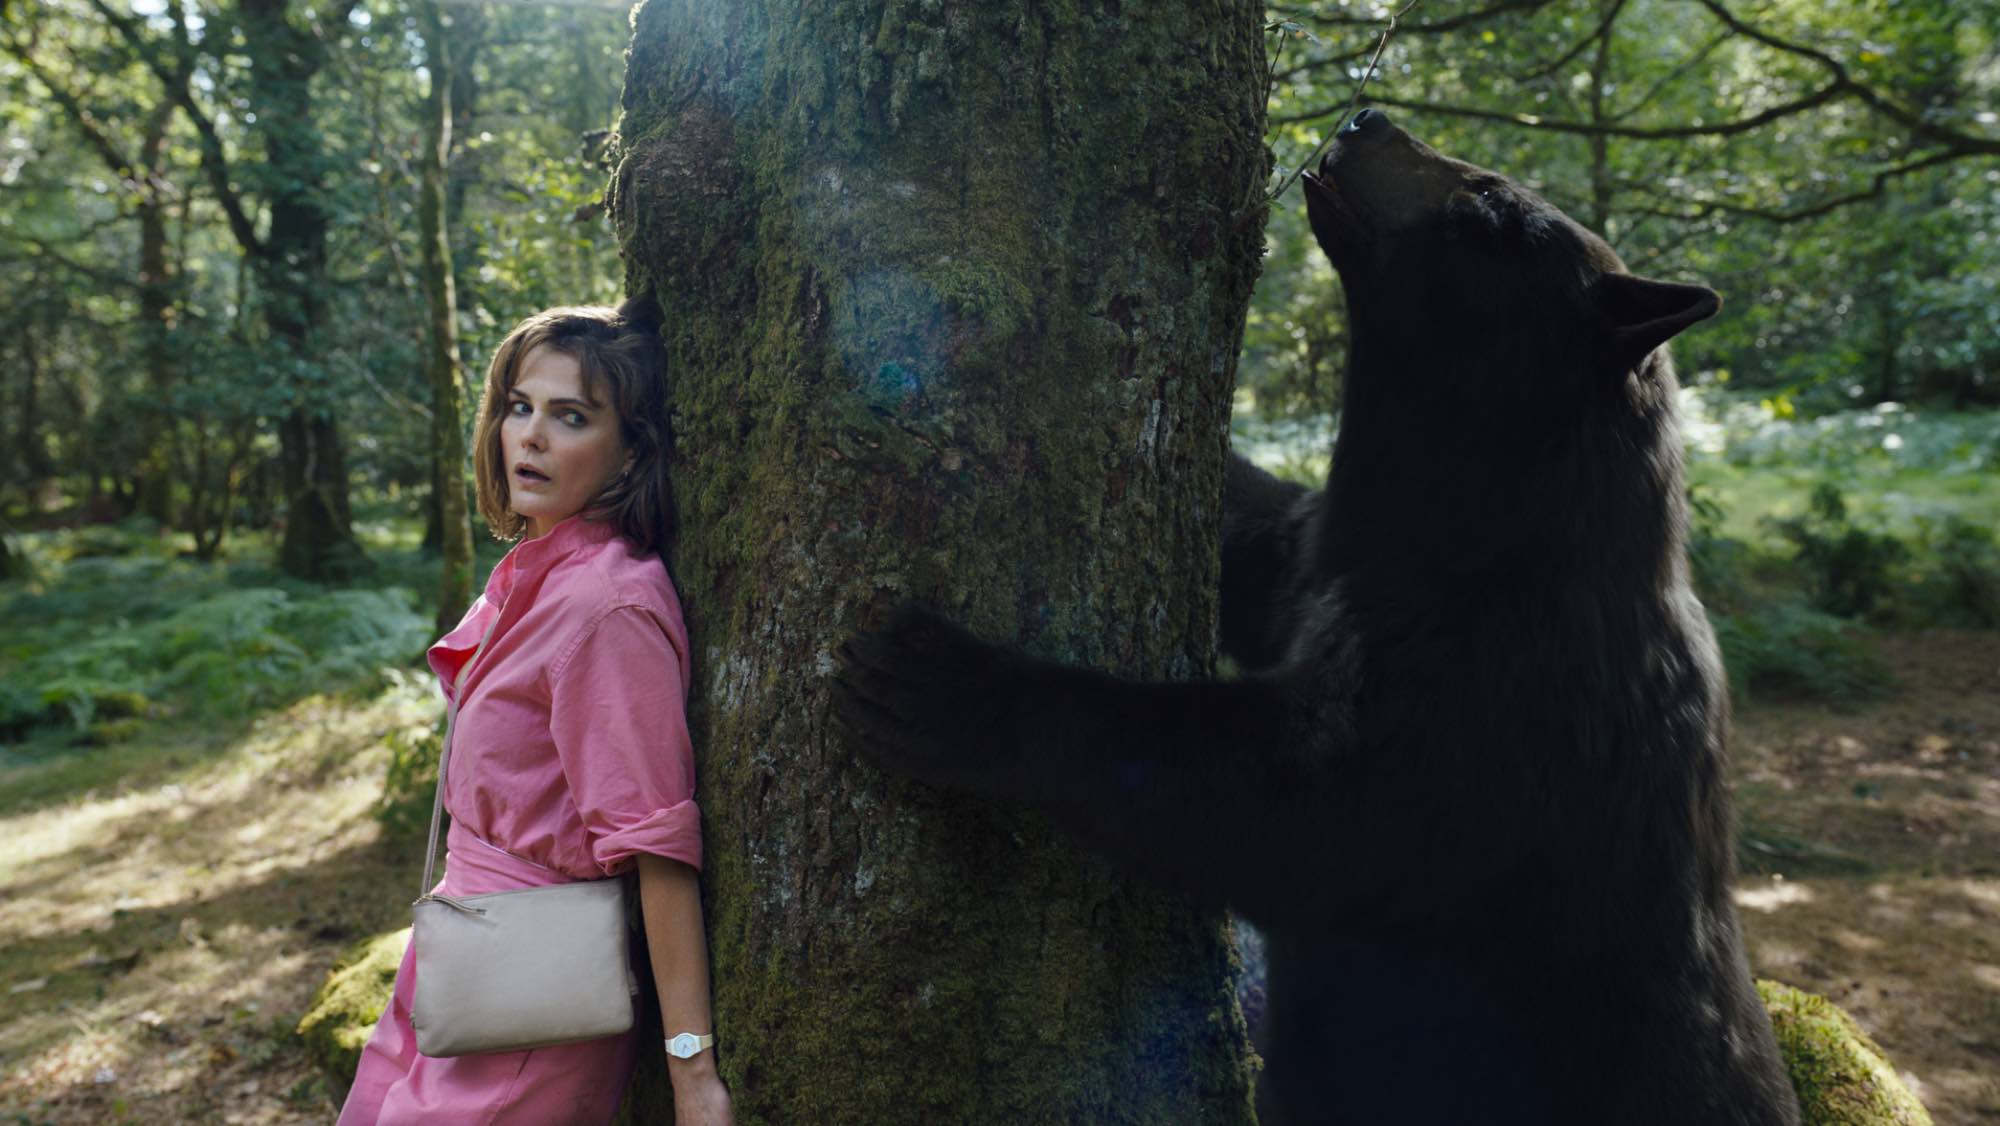 'Cocaine Bear' Keri Russell as Sari wearing pink while hiding behind a tree from a black bear on the other side